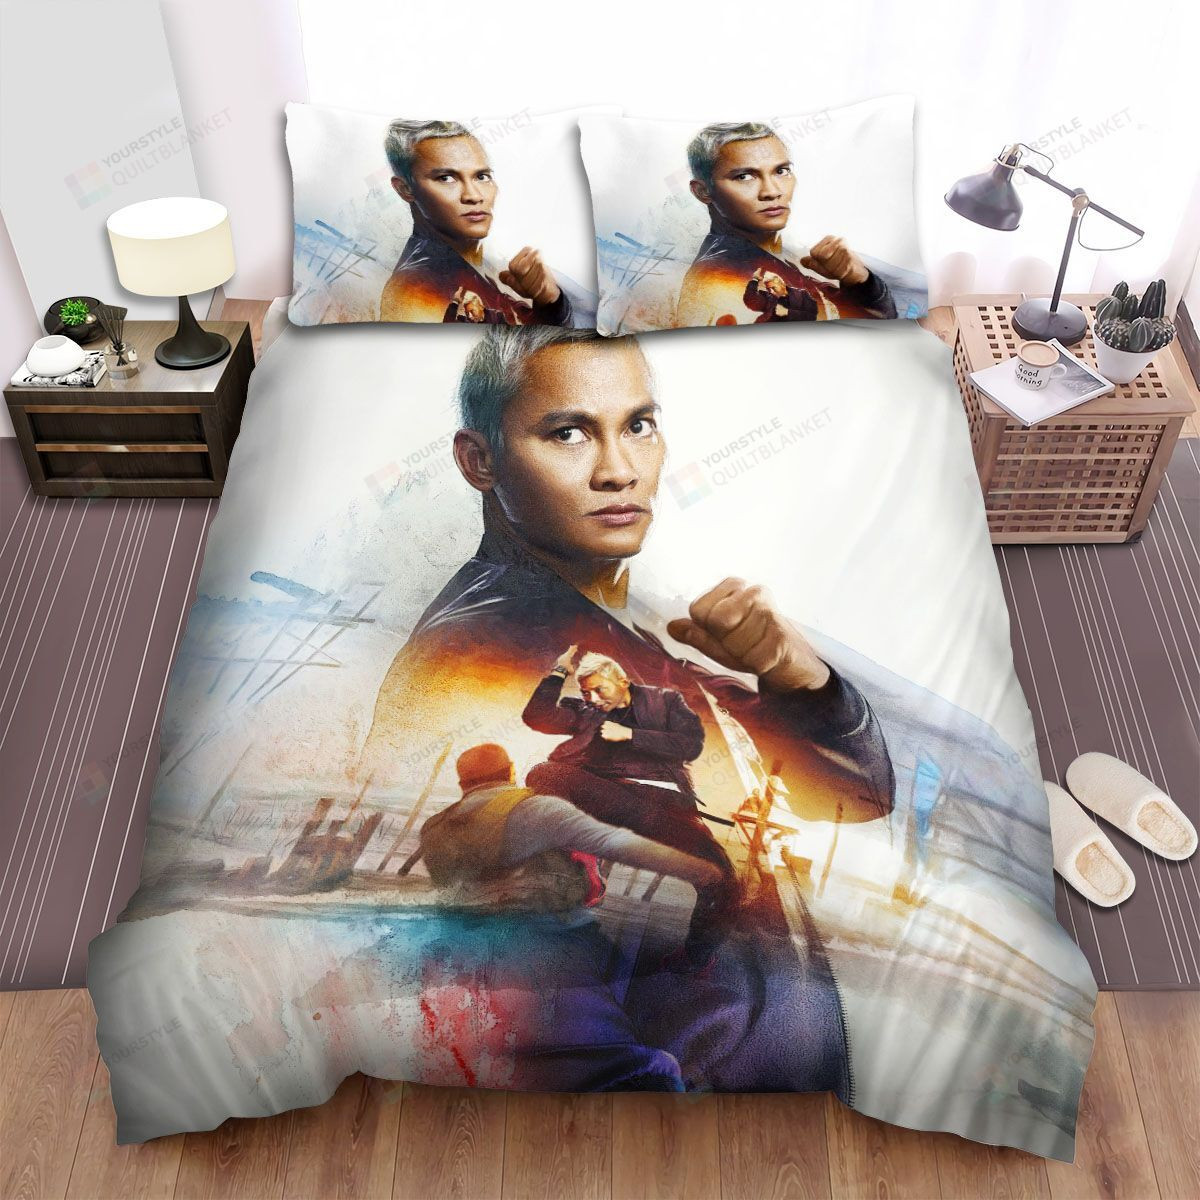 Xxx Return Of Xander Cage Tony Jaa Is Talon Poster Bed Sheets Duvet Cover Bedding Sets